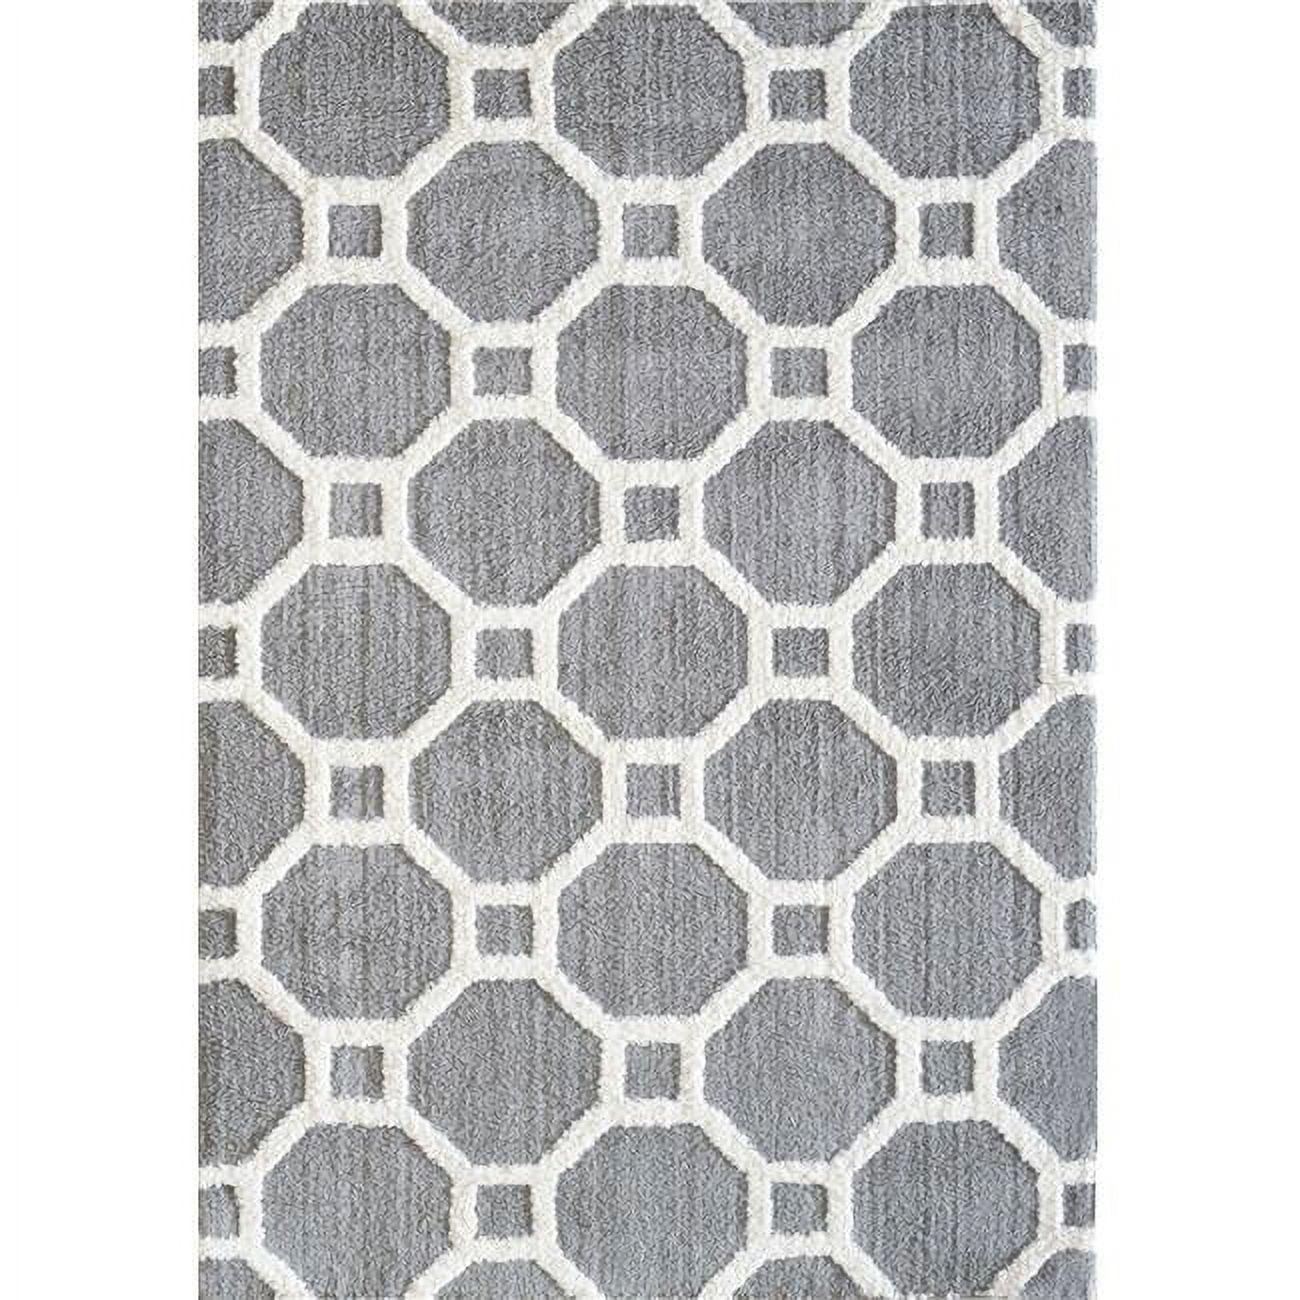 Si695903901 5 Ft. 3 In. X 7 Ft. 7 In. Silky Shag 5903 Rectangle Contemporary Rug - 901 Silver & White